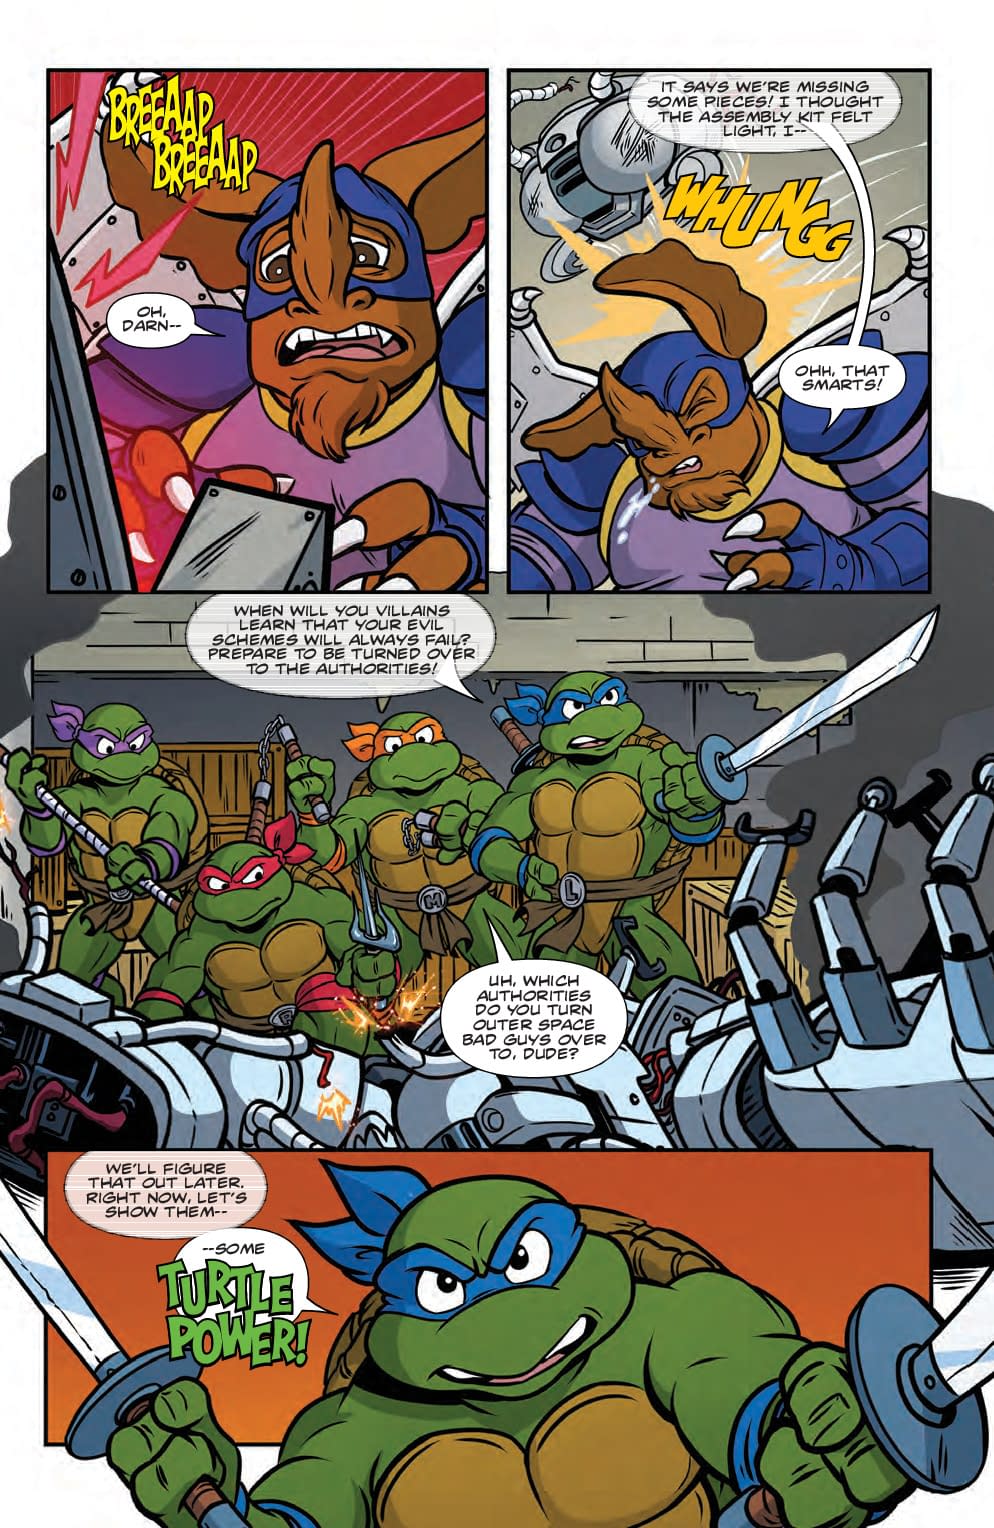 The 10 Worst Things To Happen To The Ninja Turtles In The Comics